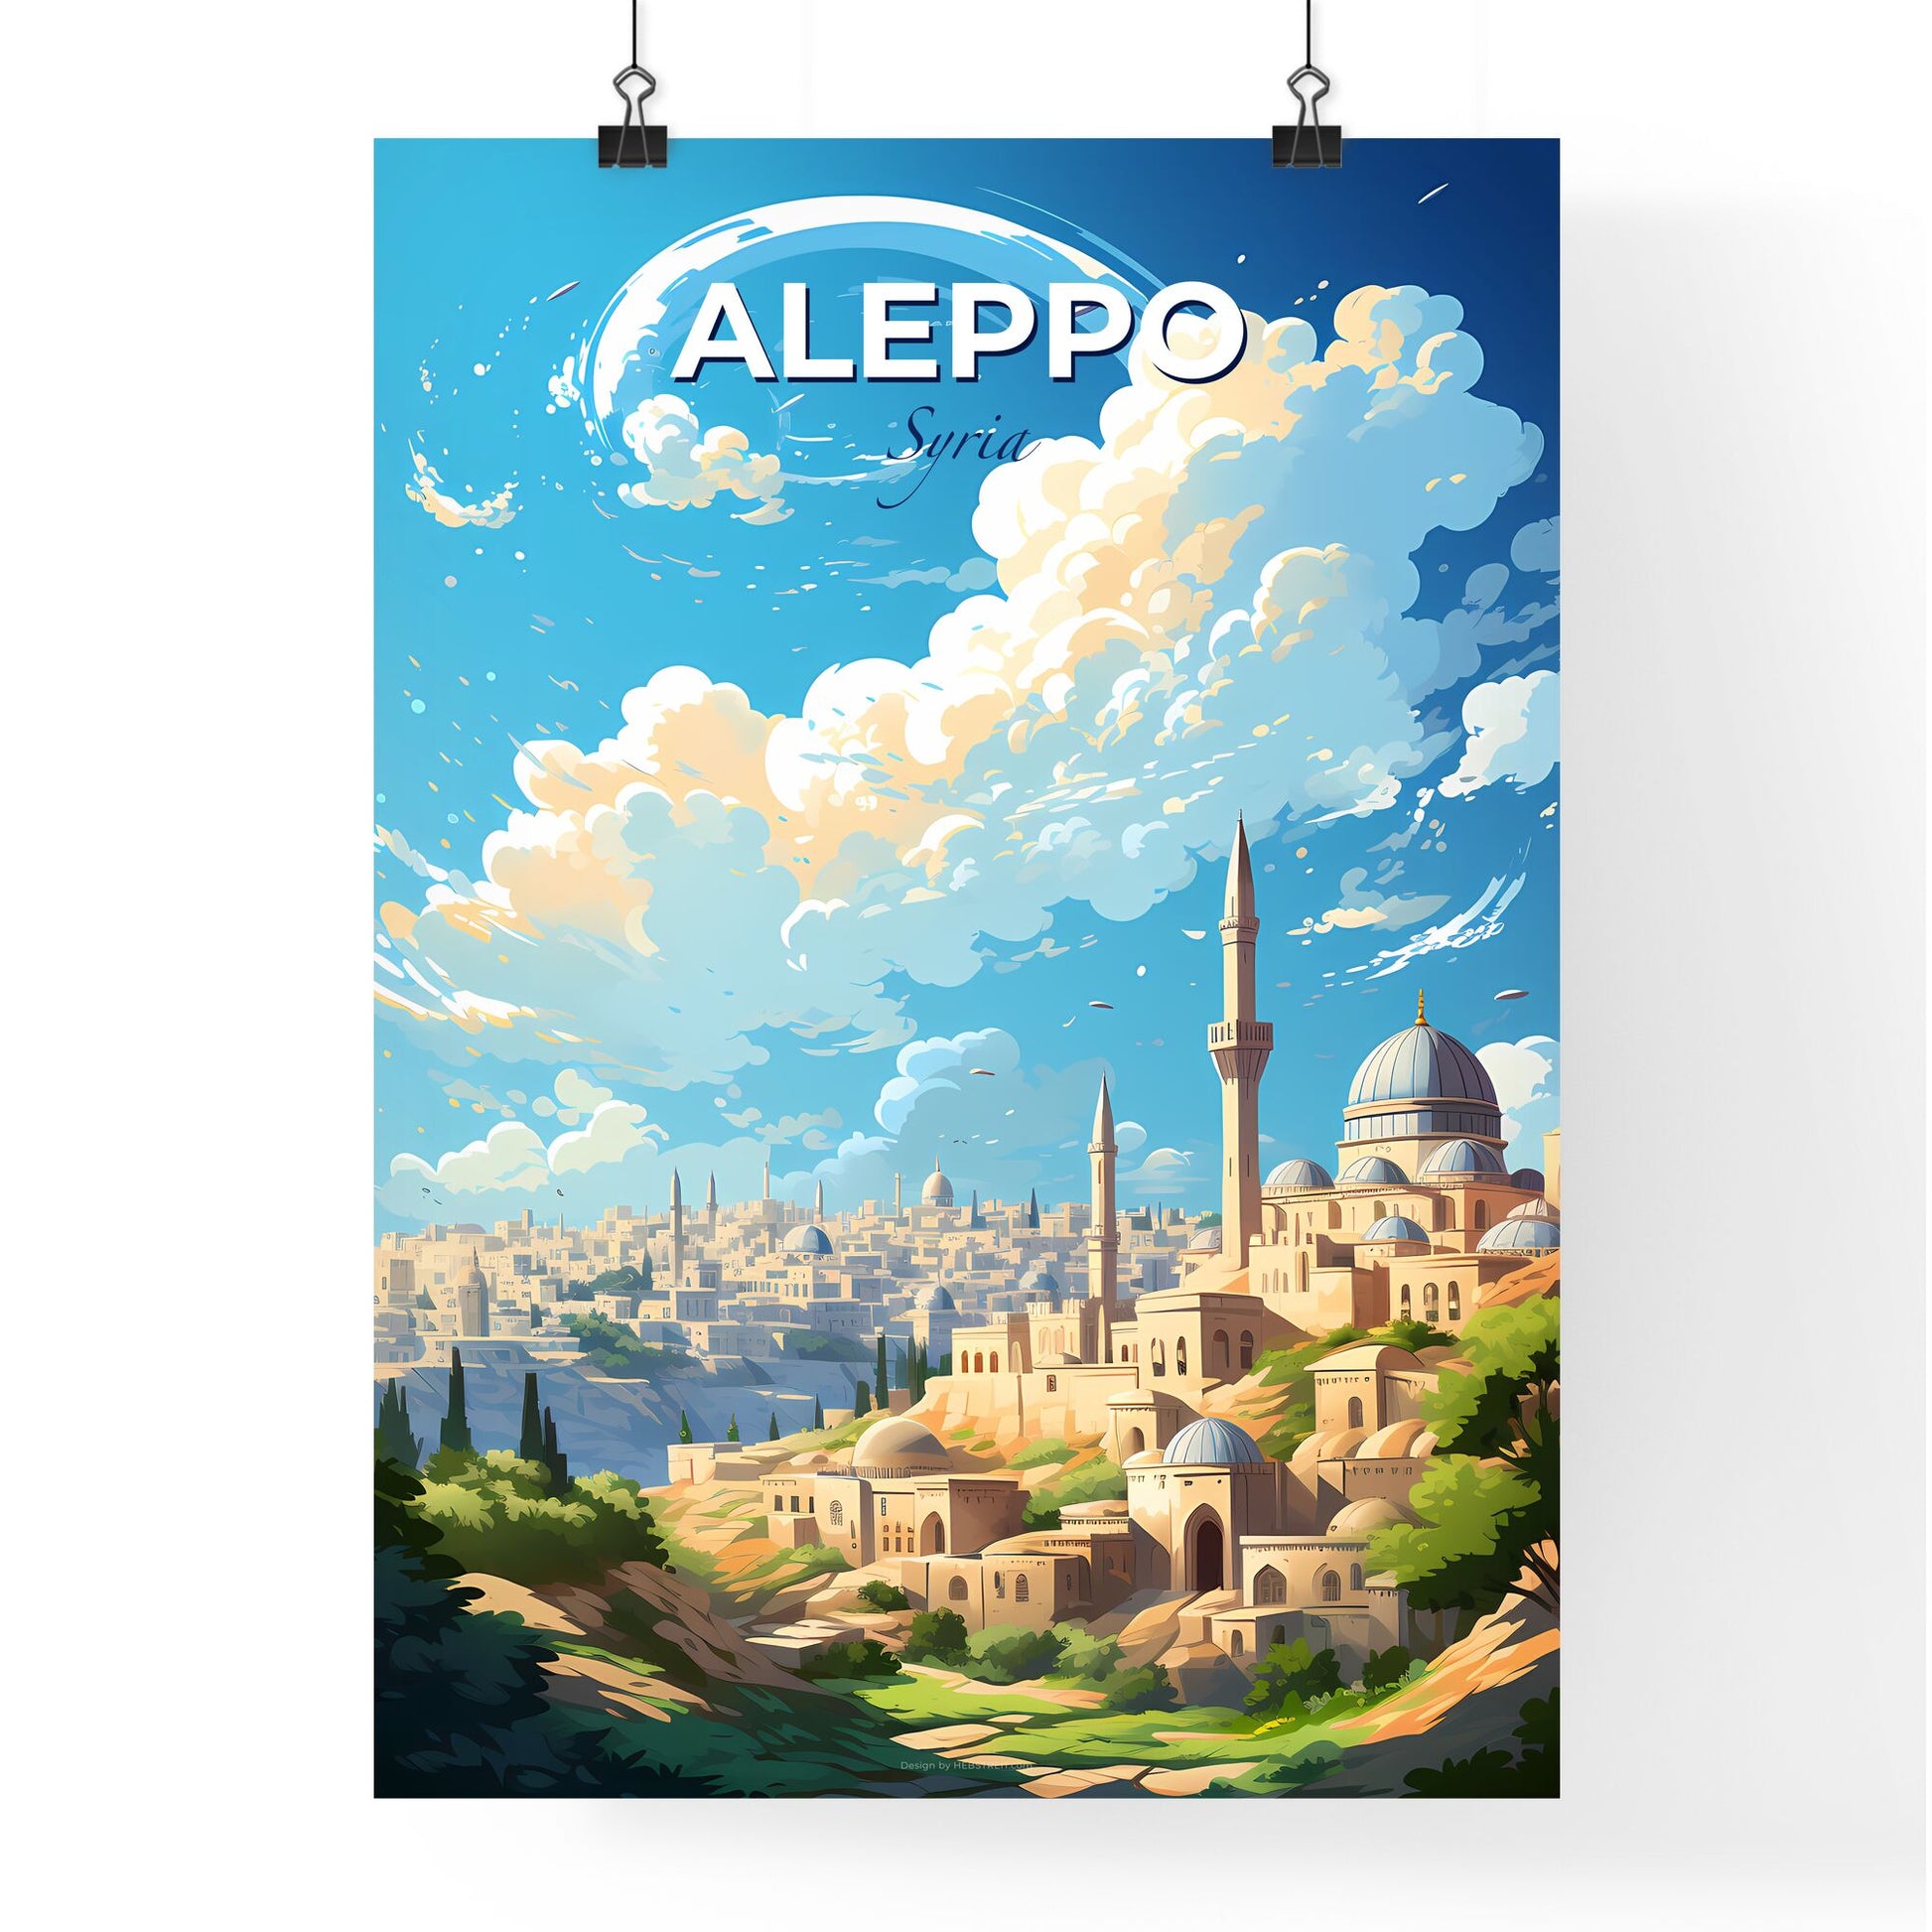 Aleppo Syria Skyline - A City With Towers And Towers On A Hill - Customizable Travel Gift Default Title